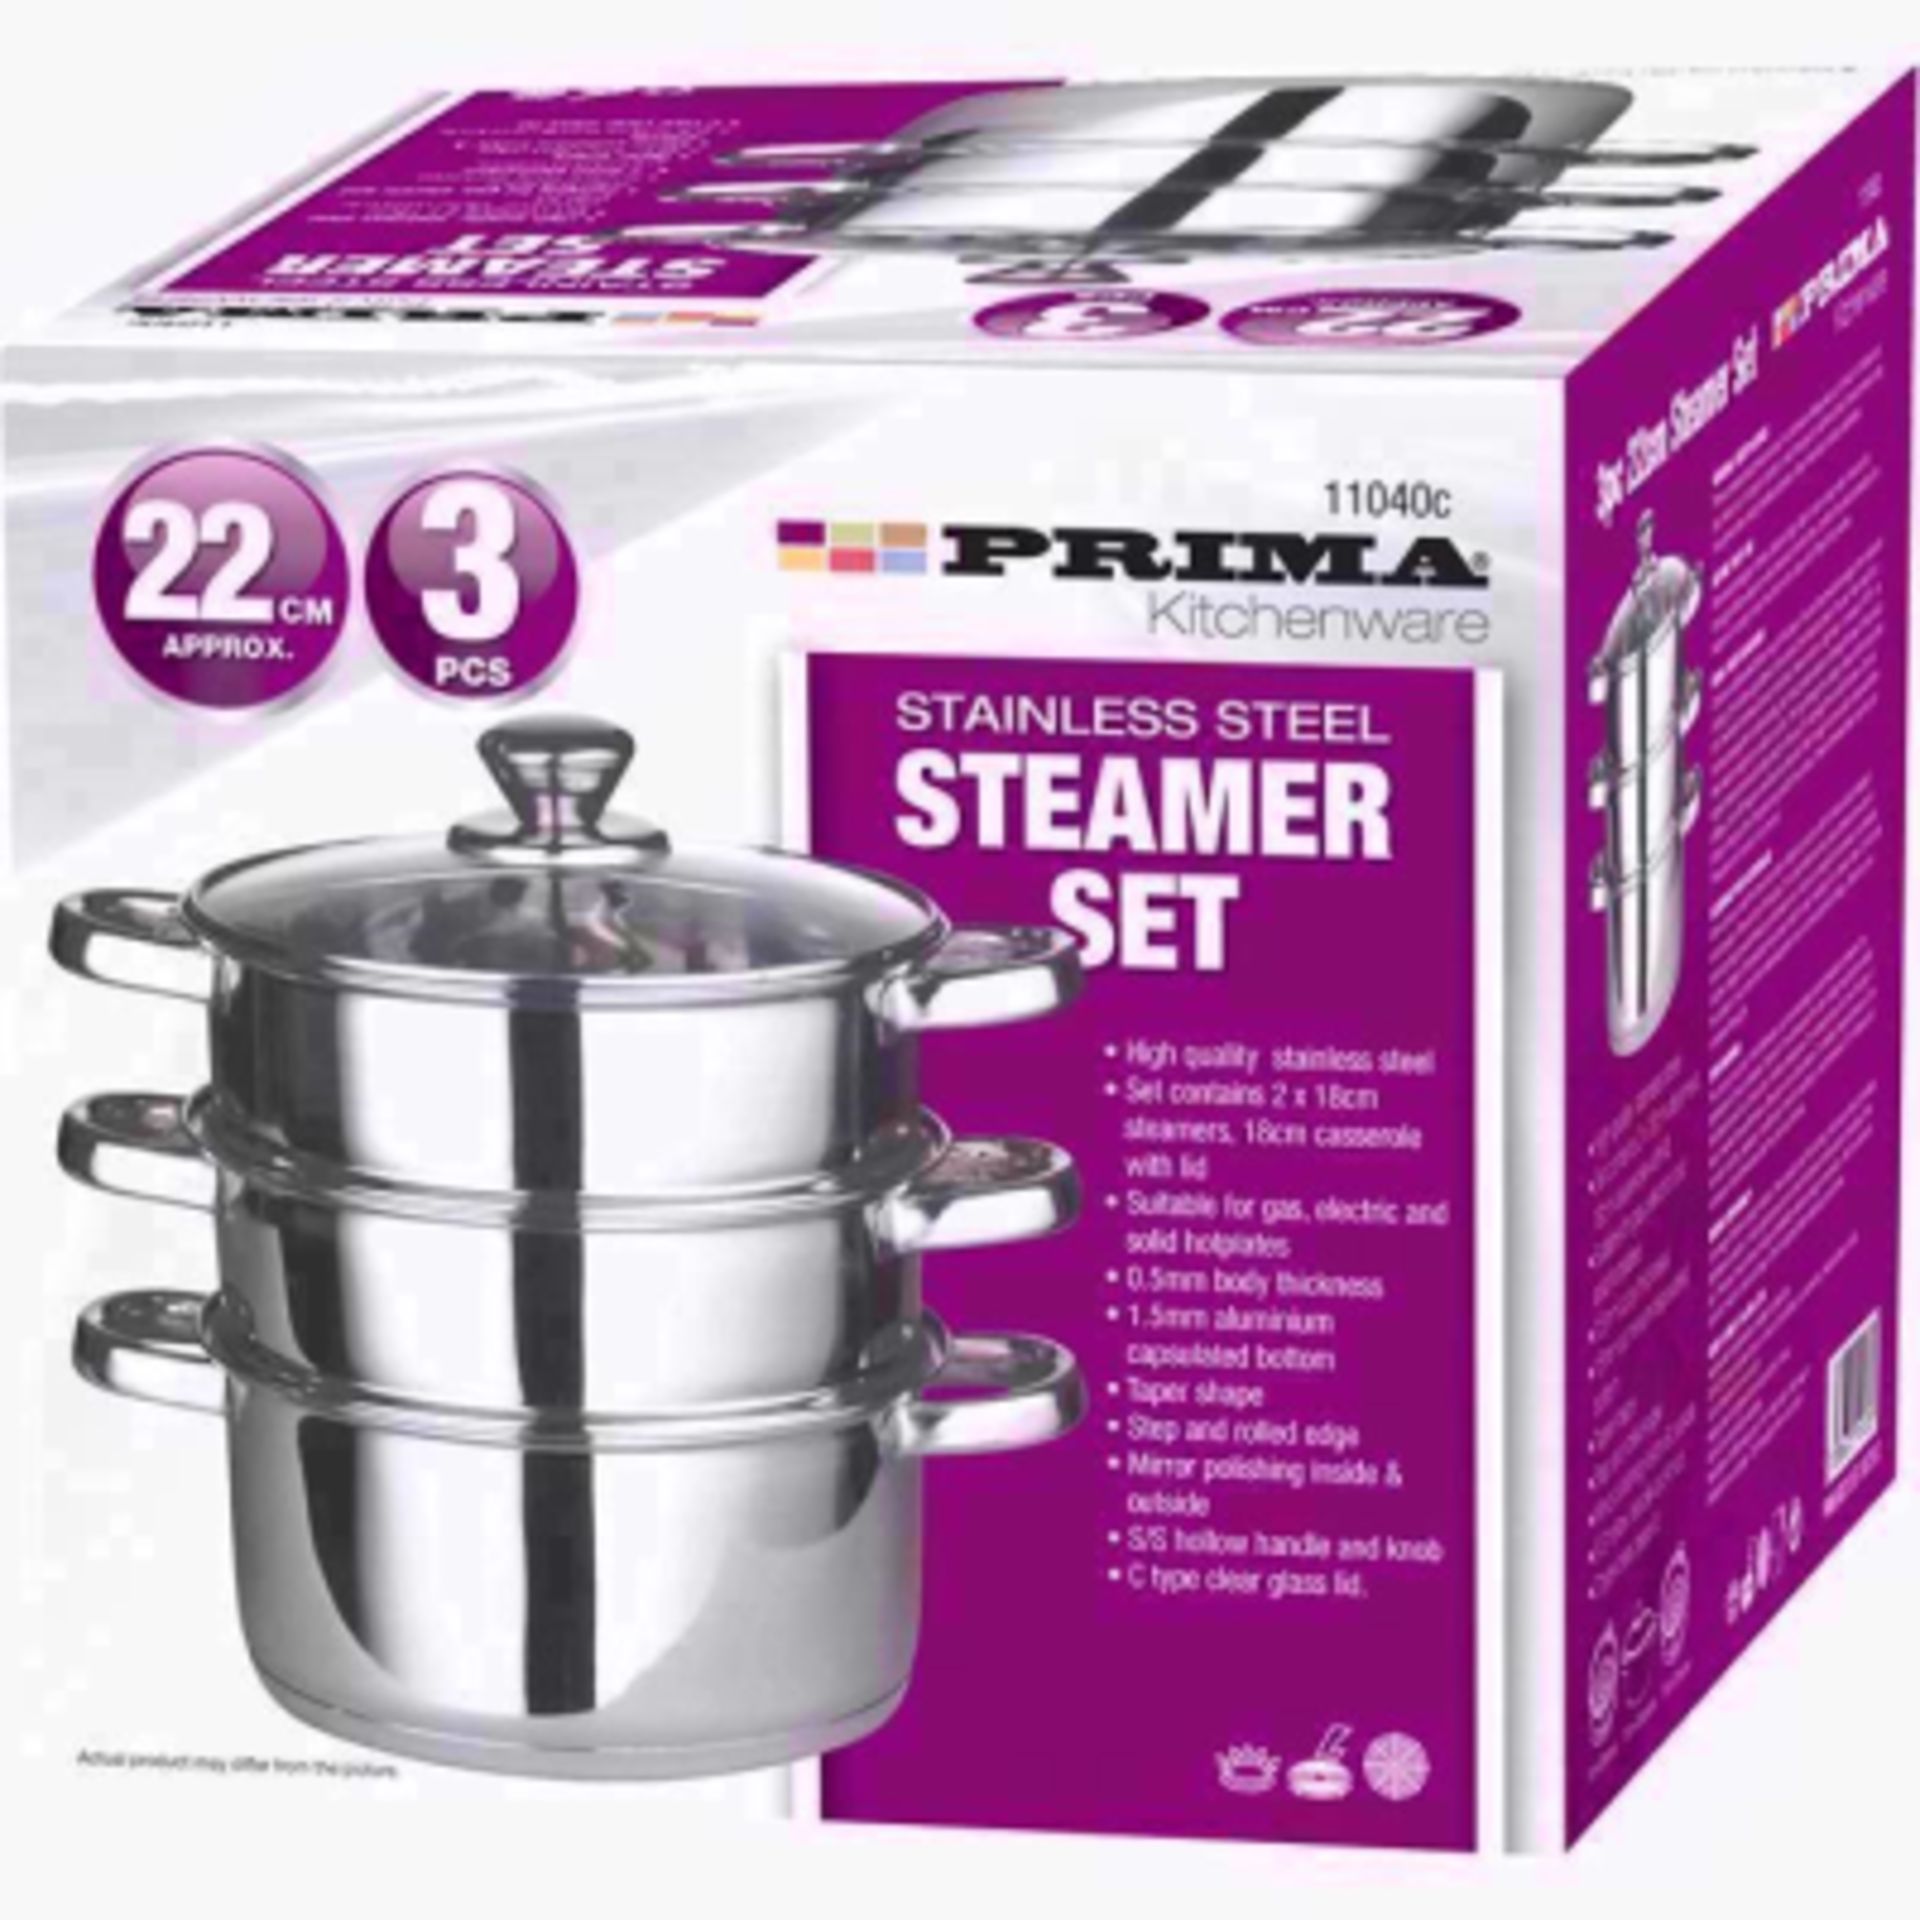 V Brand New Three Piece 22cm Stainless Steel Steamer Set Consists Of 2 X22cm Steamers & 22cm - Image 2 of 2